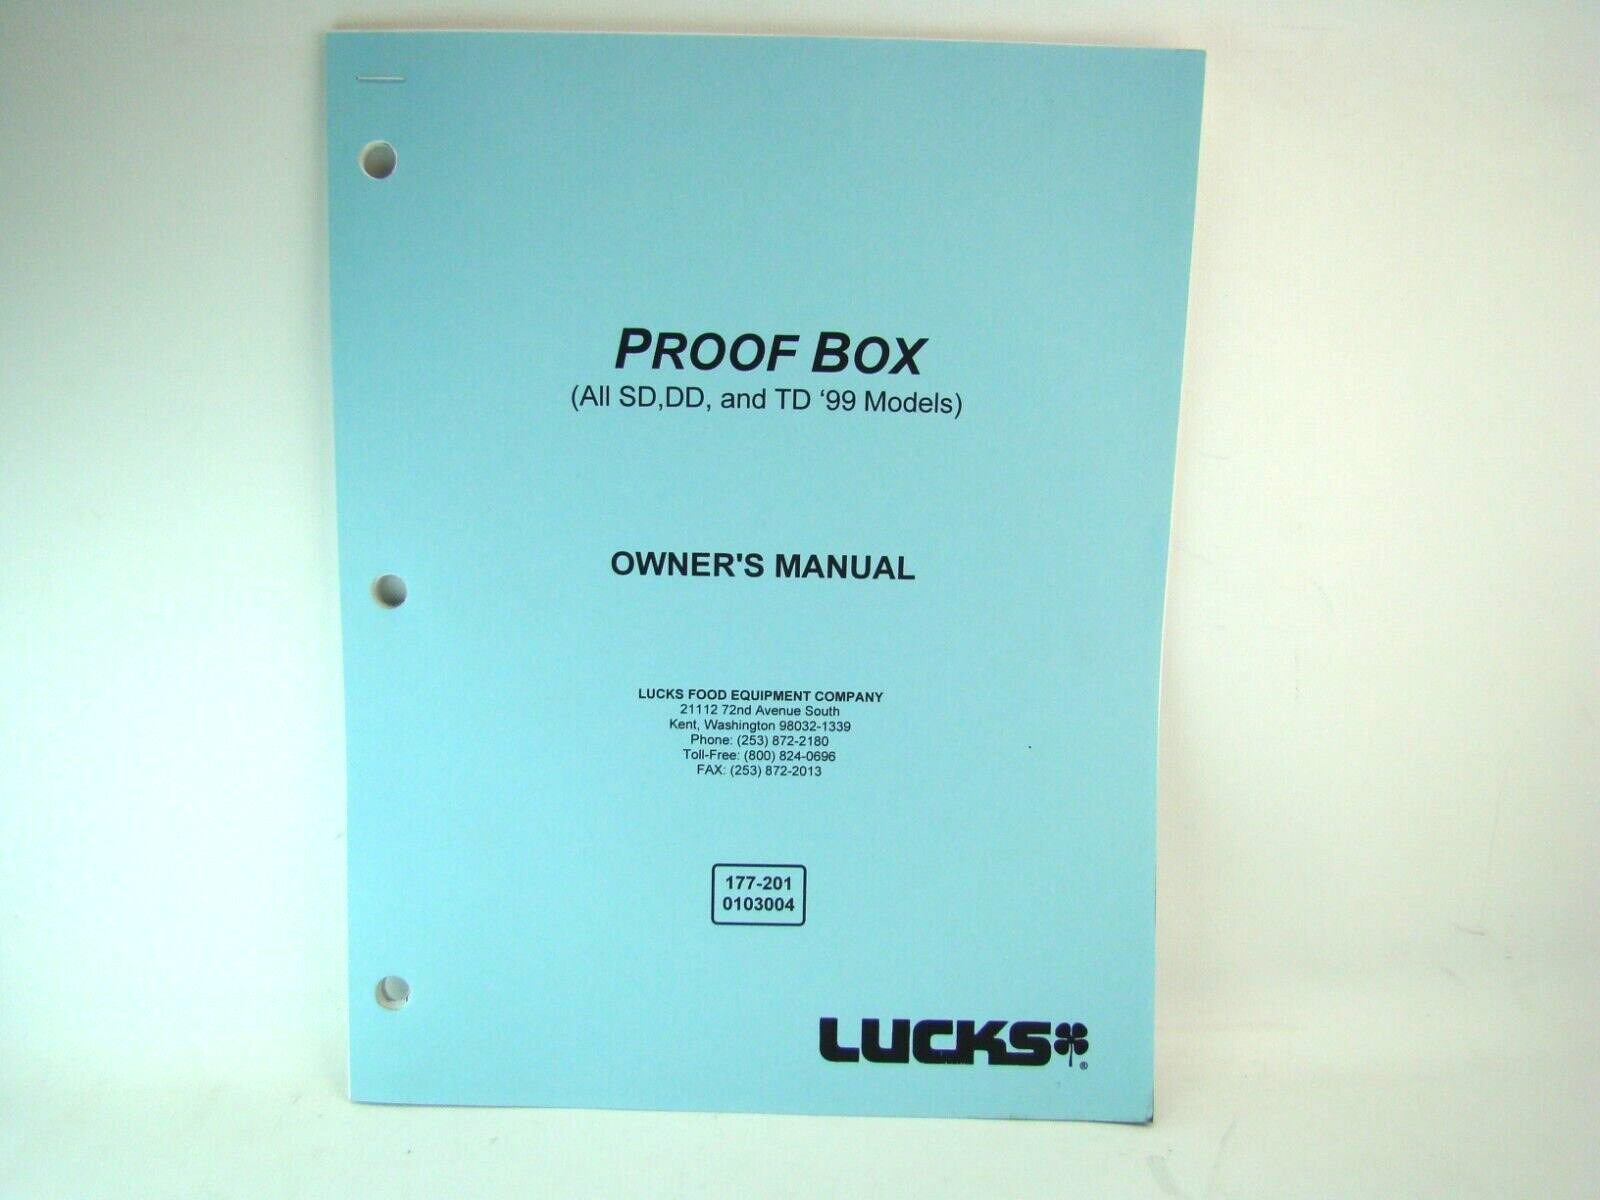 Lucks Proof Box Owners Manual Includes All SD, DD, TD \'99 Models